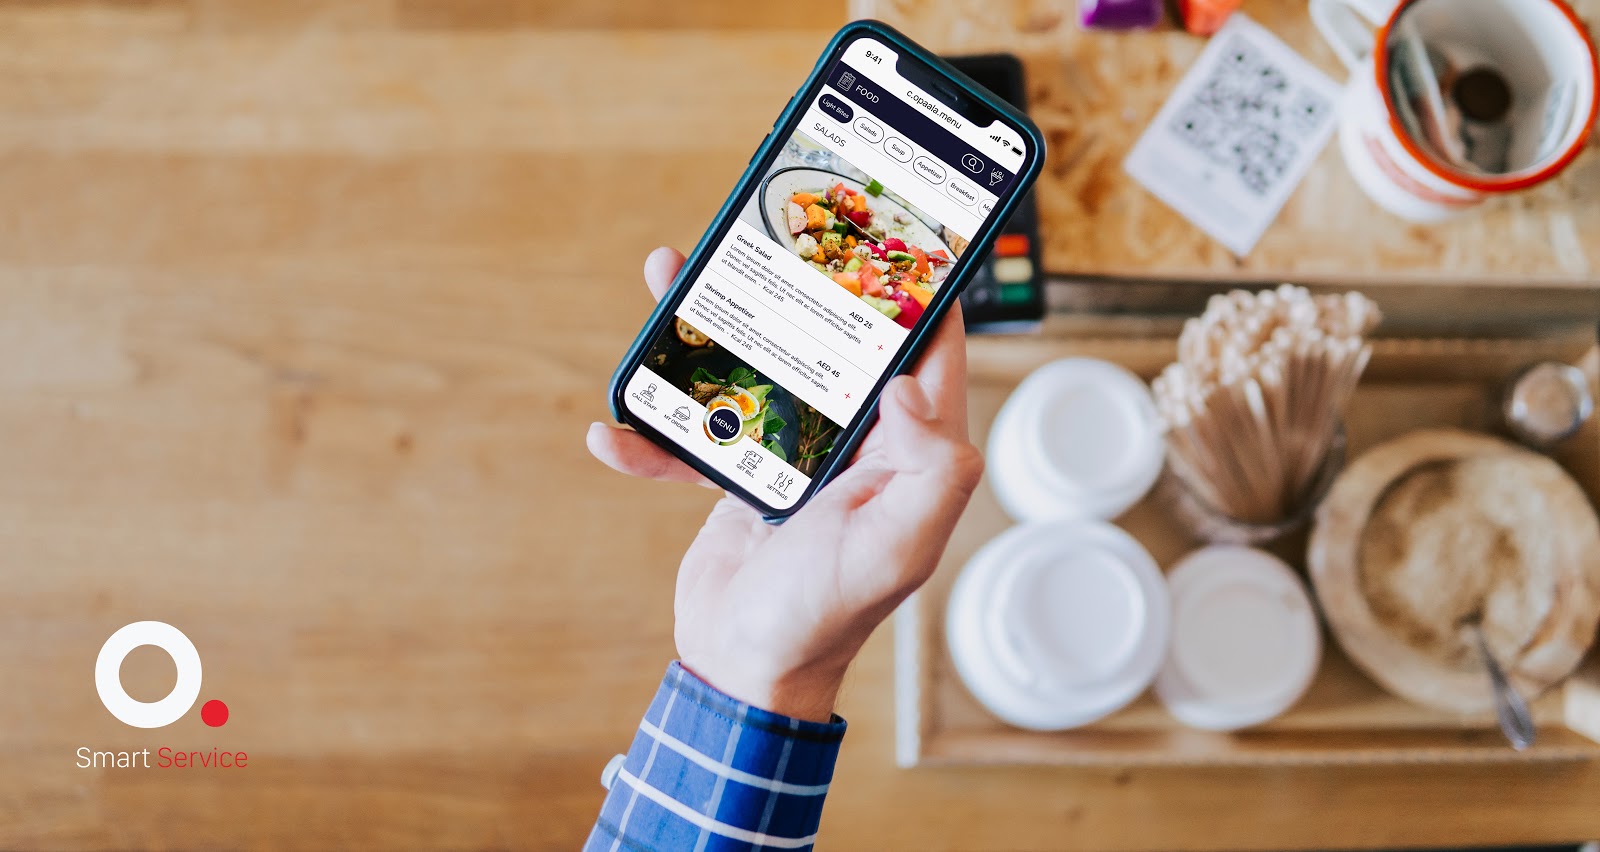 Image for Opaala’s Smart Service Platform Reveals Success With Revenue Spikes At Partner F&B Outlets And Rapid Expansion